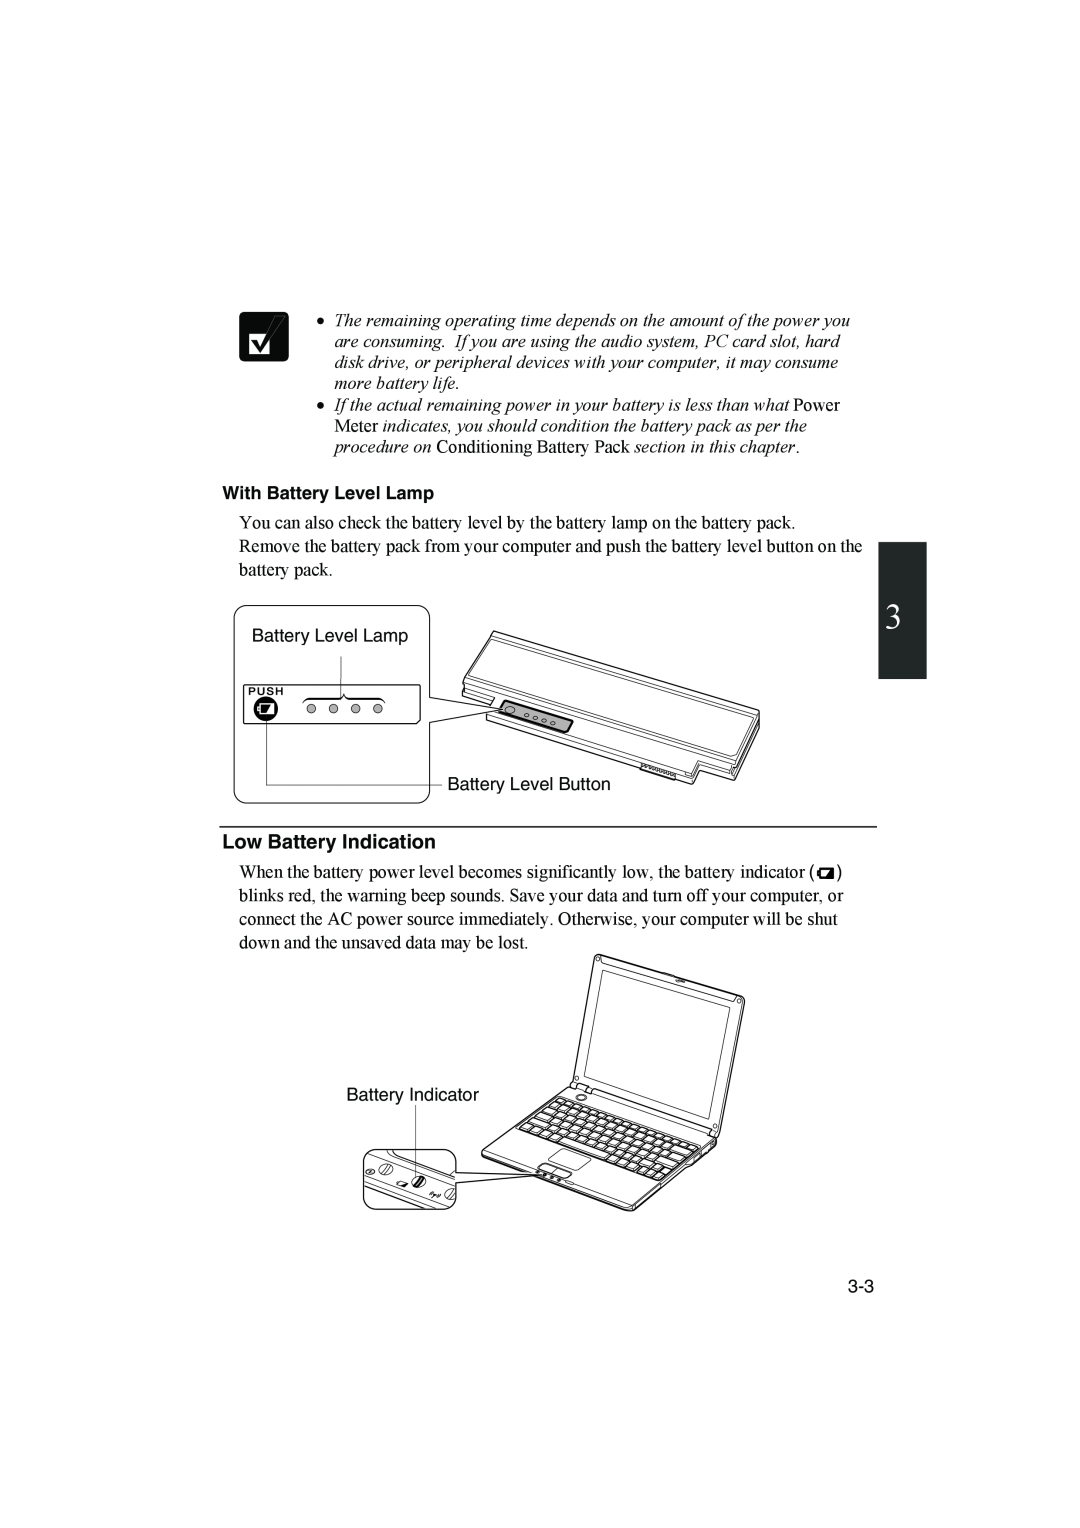 Sharp PC-MM1 manual Low Battery Indication, With Battery Level Lamp 